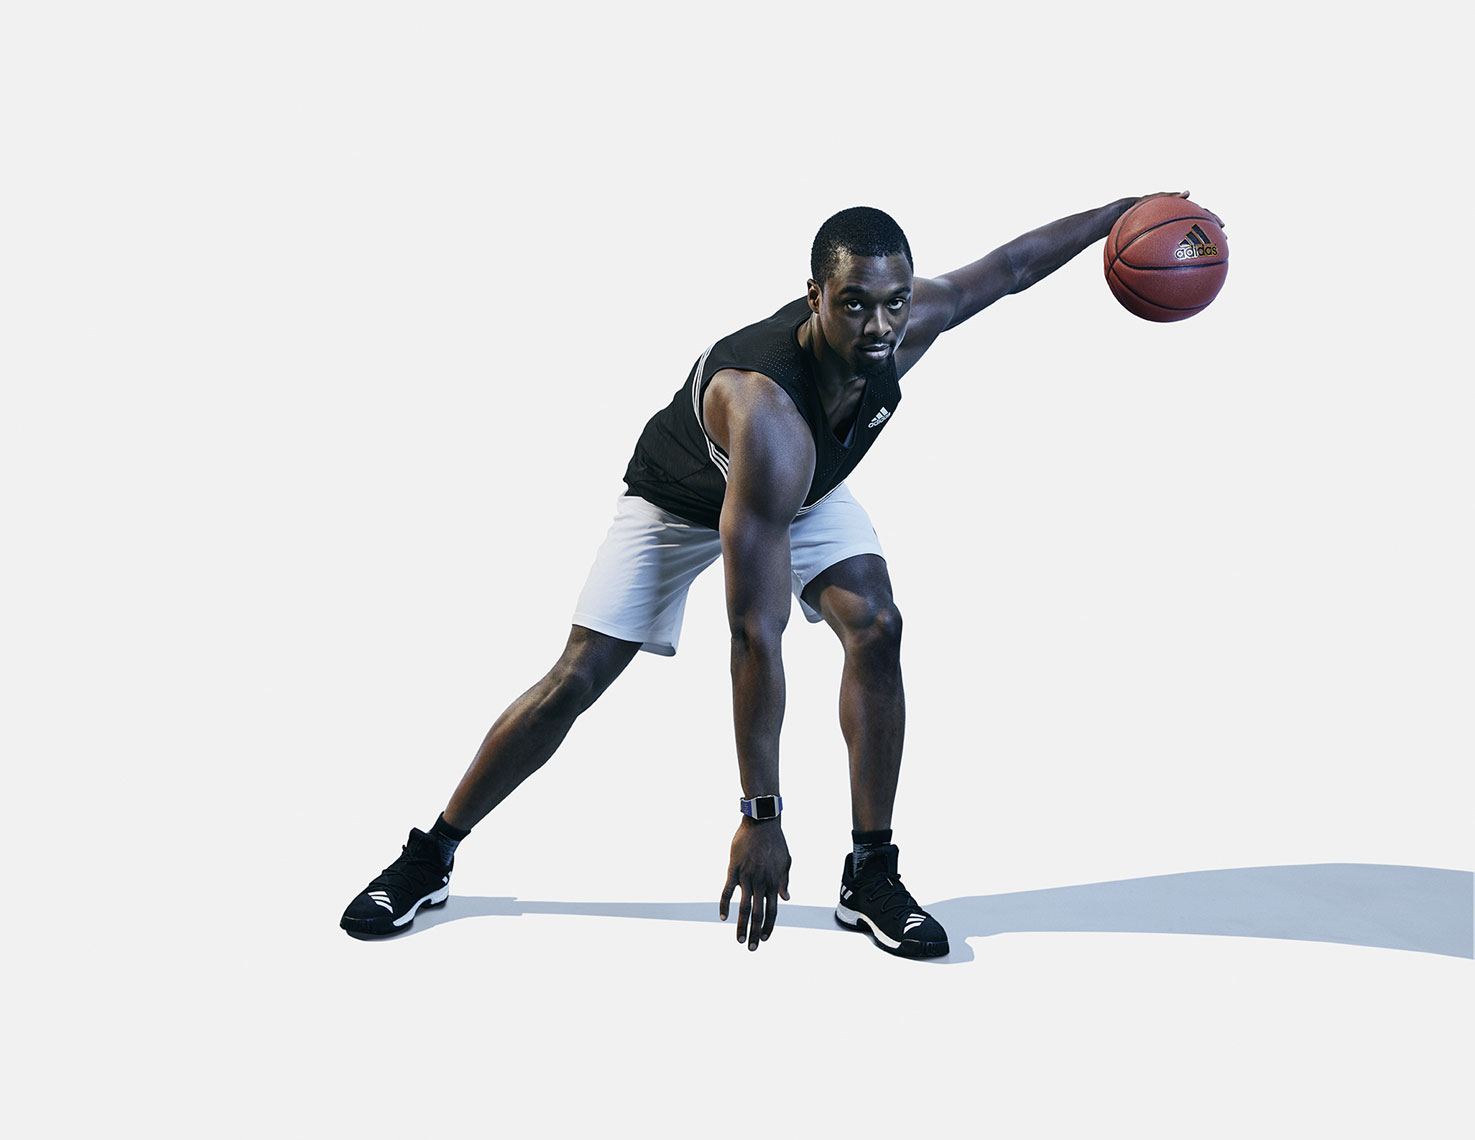 RC RIVERA shoots NBA player Harrison Barnes for Fitbit and Adidas. 